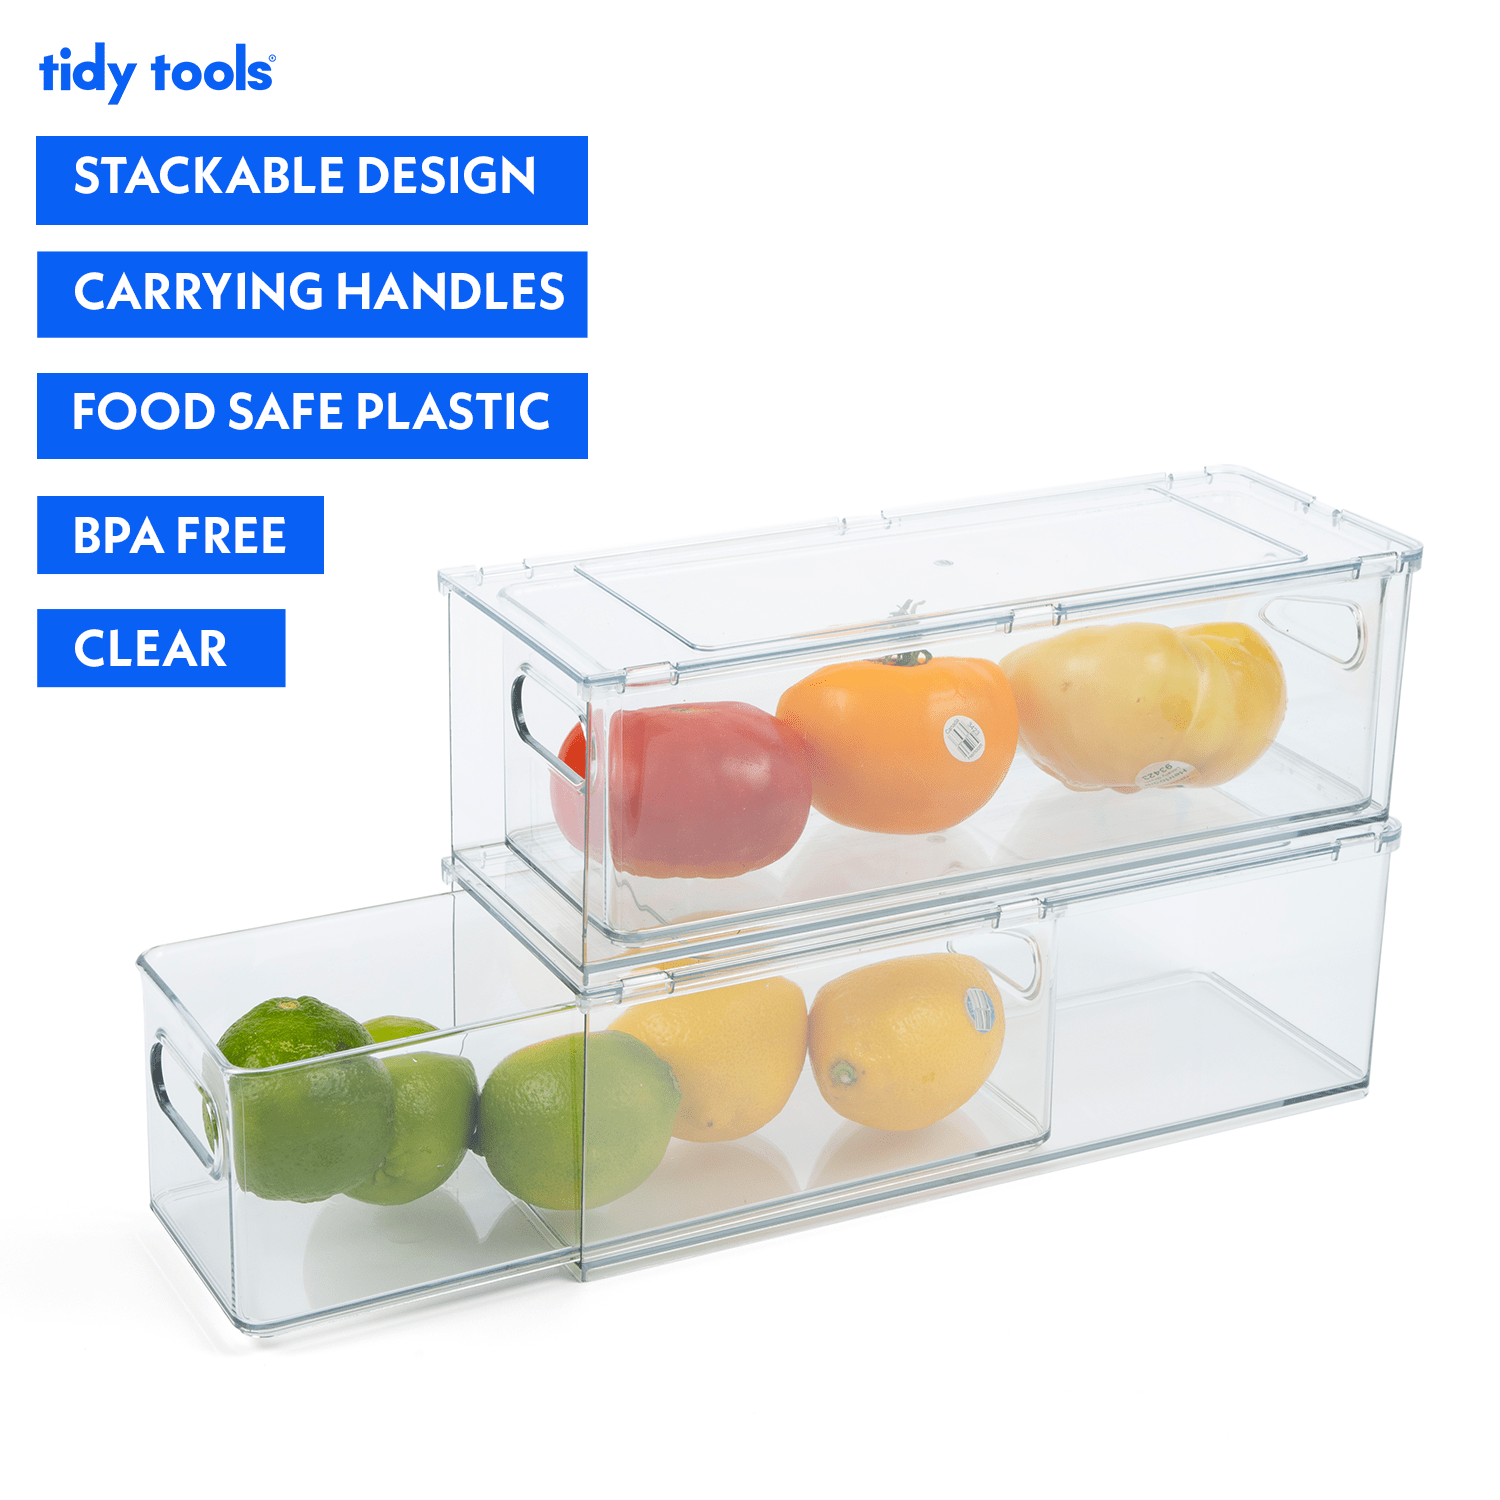 Drawers - Clear Plastic Stackable Pull-Out Refrigerator Organizer